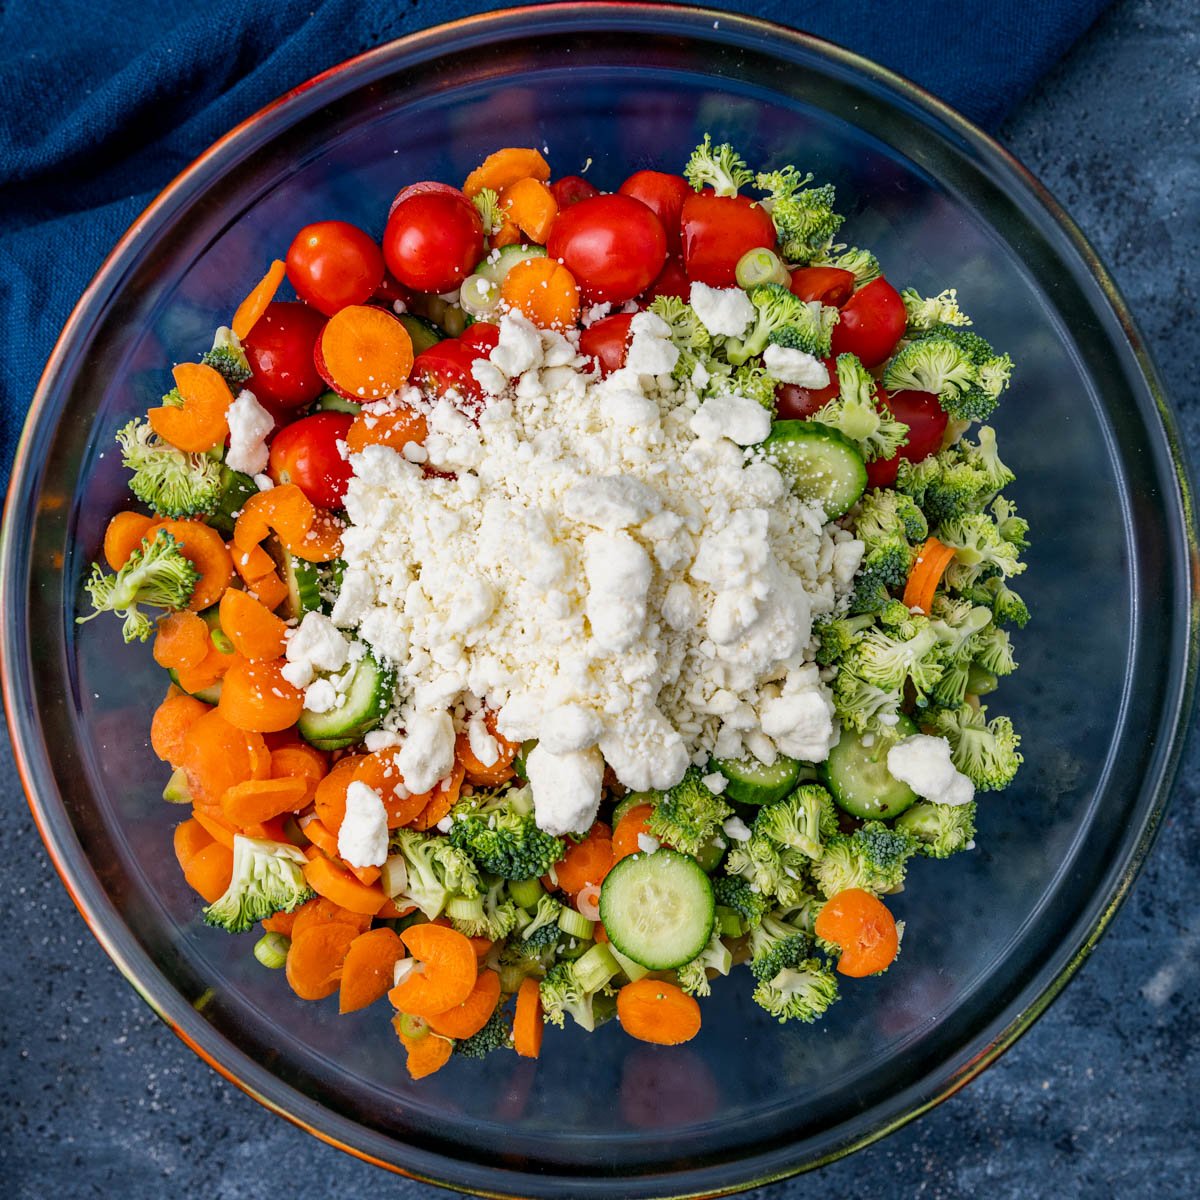 overhead view of vegetables and feta cheese in a bowl